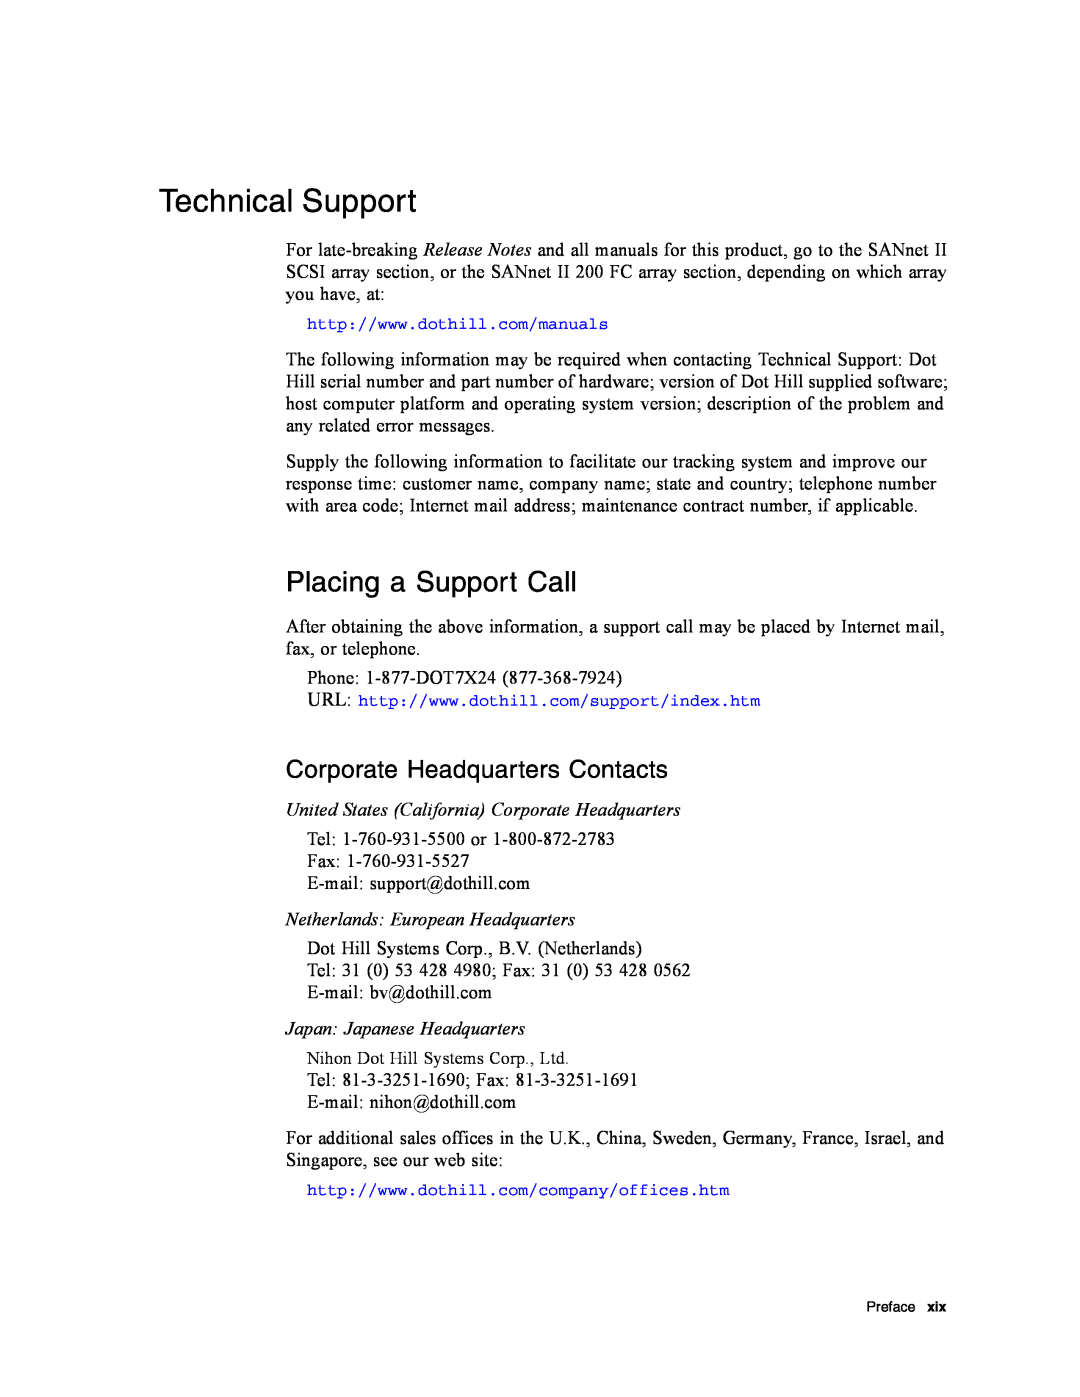 Dot Hill Systems II 200 FC service manual Technical Support, Placing a Support Call, Corporate Headquarters Contacts 